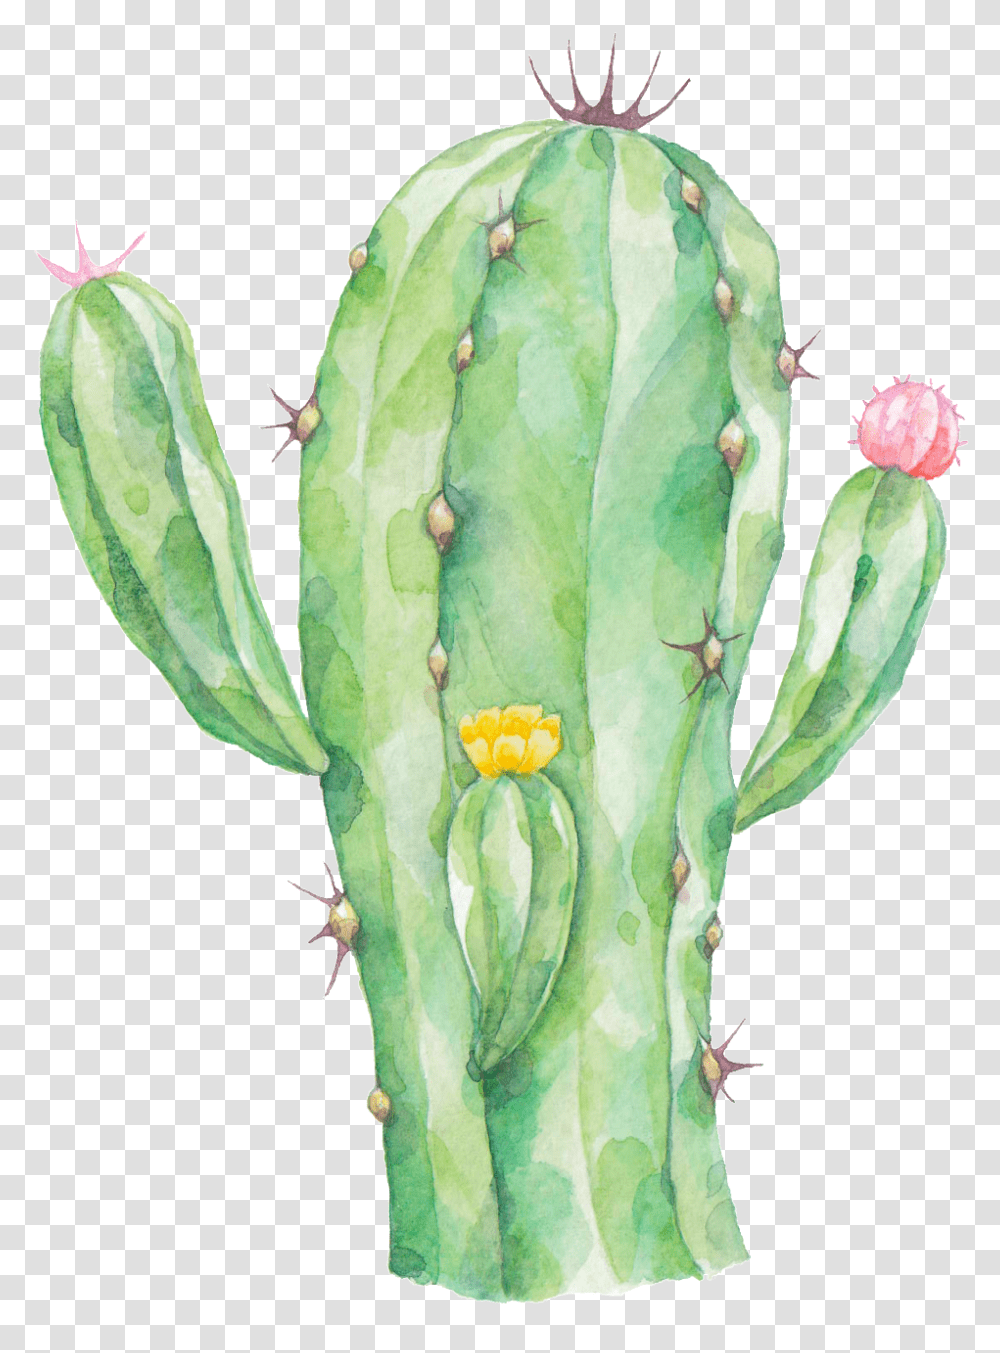 Download Radiation Proof Cactus Cactus Watercolor Cactus With Background, Plant Transparent Png